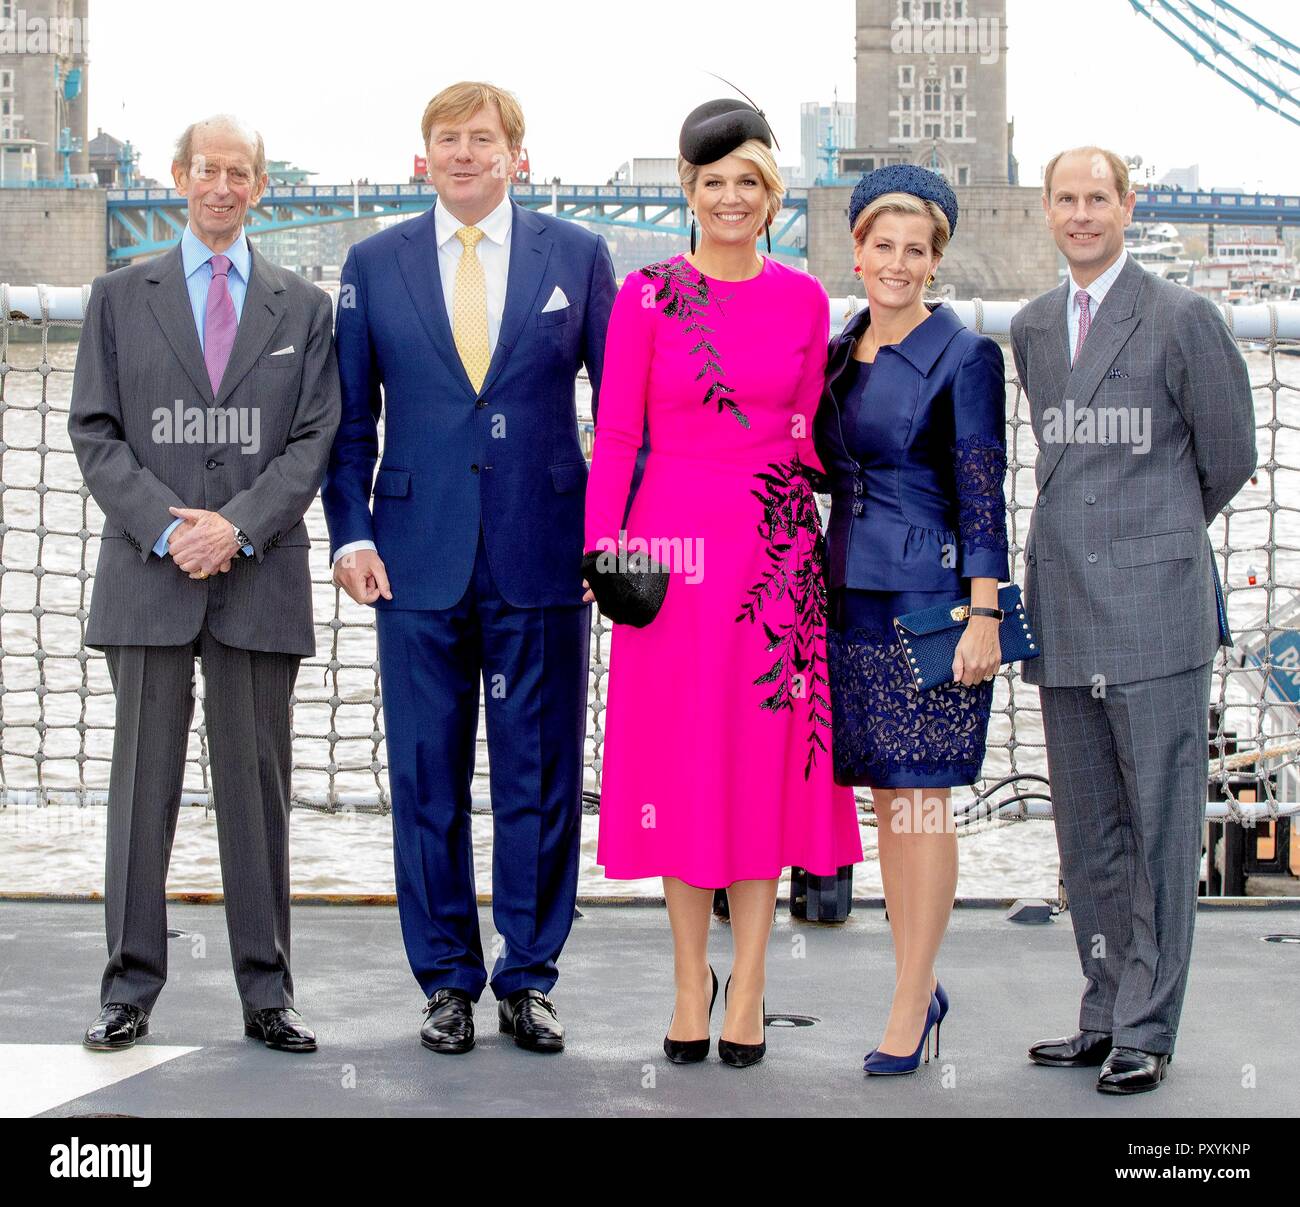 london-uk-24th-oct-2018-king-willem-alexander-queen-maxima-of-the-netherlands-duke-of-kent-earl-of-wessex-prince-edward-and-his-wife-countess-of-wessex-sophie-rhys-jones-at-the-zr-ms-zeeland-in-londen-on-october-24-2018-for-a-fotomoment-in-front-of-the-tower-bridge-on-the-last-of-a-2-days-statevisit-to-the-united-kingdom-photo-albert-nieboer-netherlands-outpoint-de-vue-out-credit-dpa-picture-alliancealamy-live-news-PXYKNP.jpg